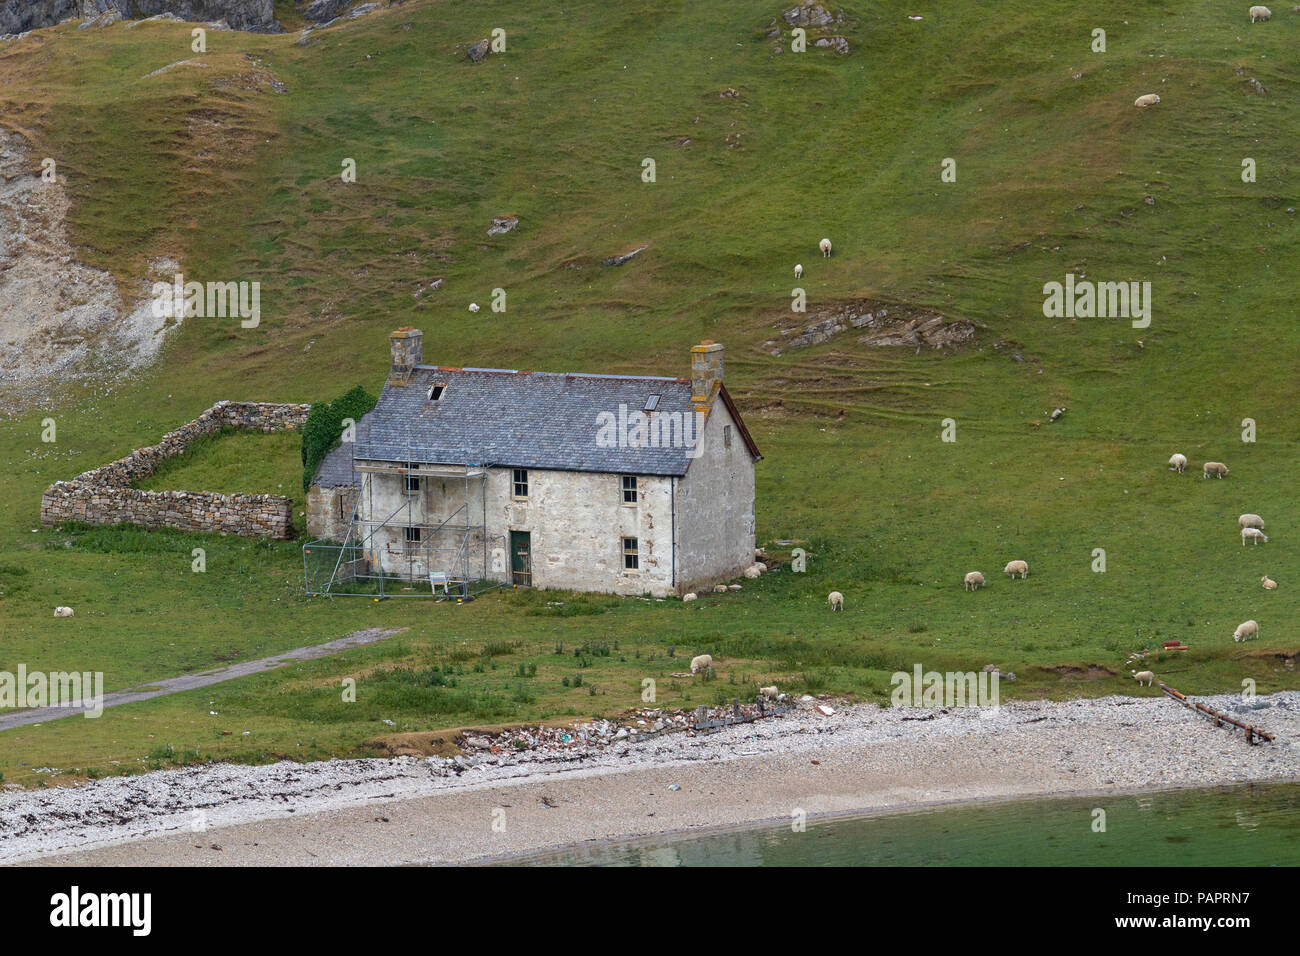 The old ferry house at Ard Neakie, Loch Eriboll, Sutherland, Scotland, UK Stock Photo